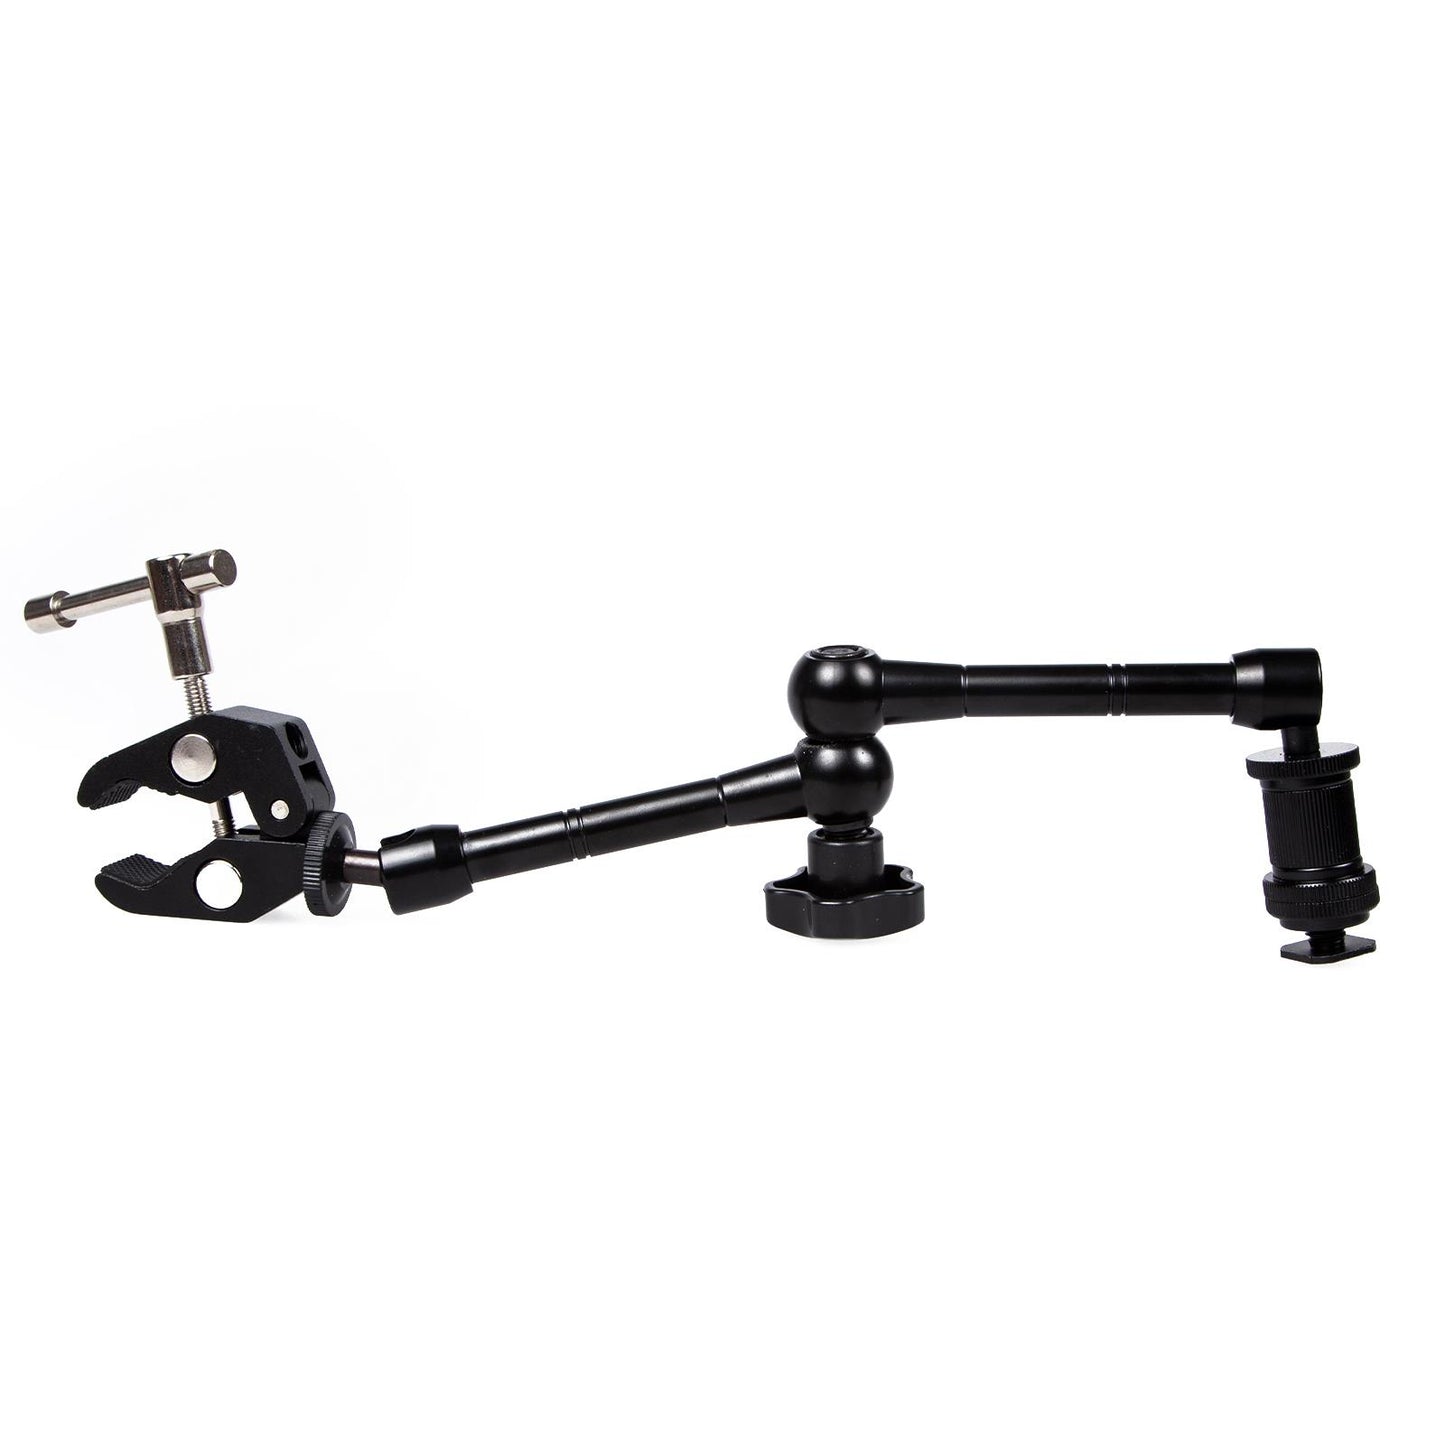 Articulating Friction Arm 11" with Large Super Crab Clamp and Hot Shoe Mount 1/4" Magic DSLR Tripod Arms Kit for Photography, Video, Camera Rig, LED Light, Flash Light, LCD Monitor